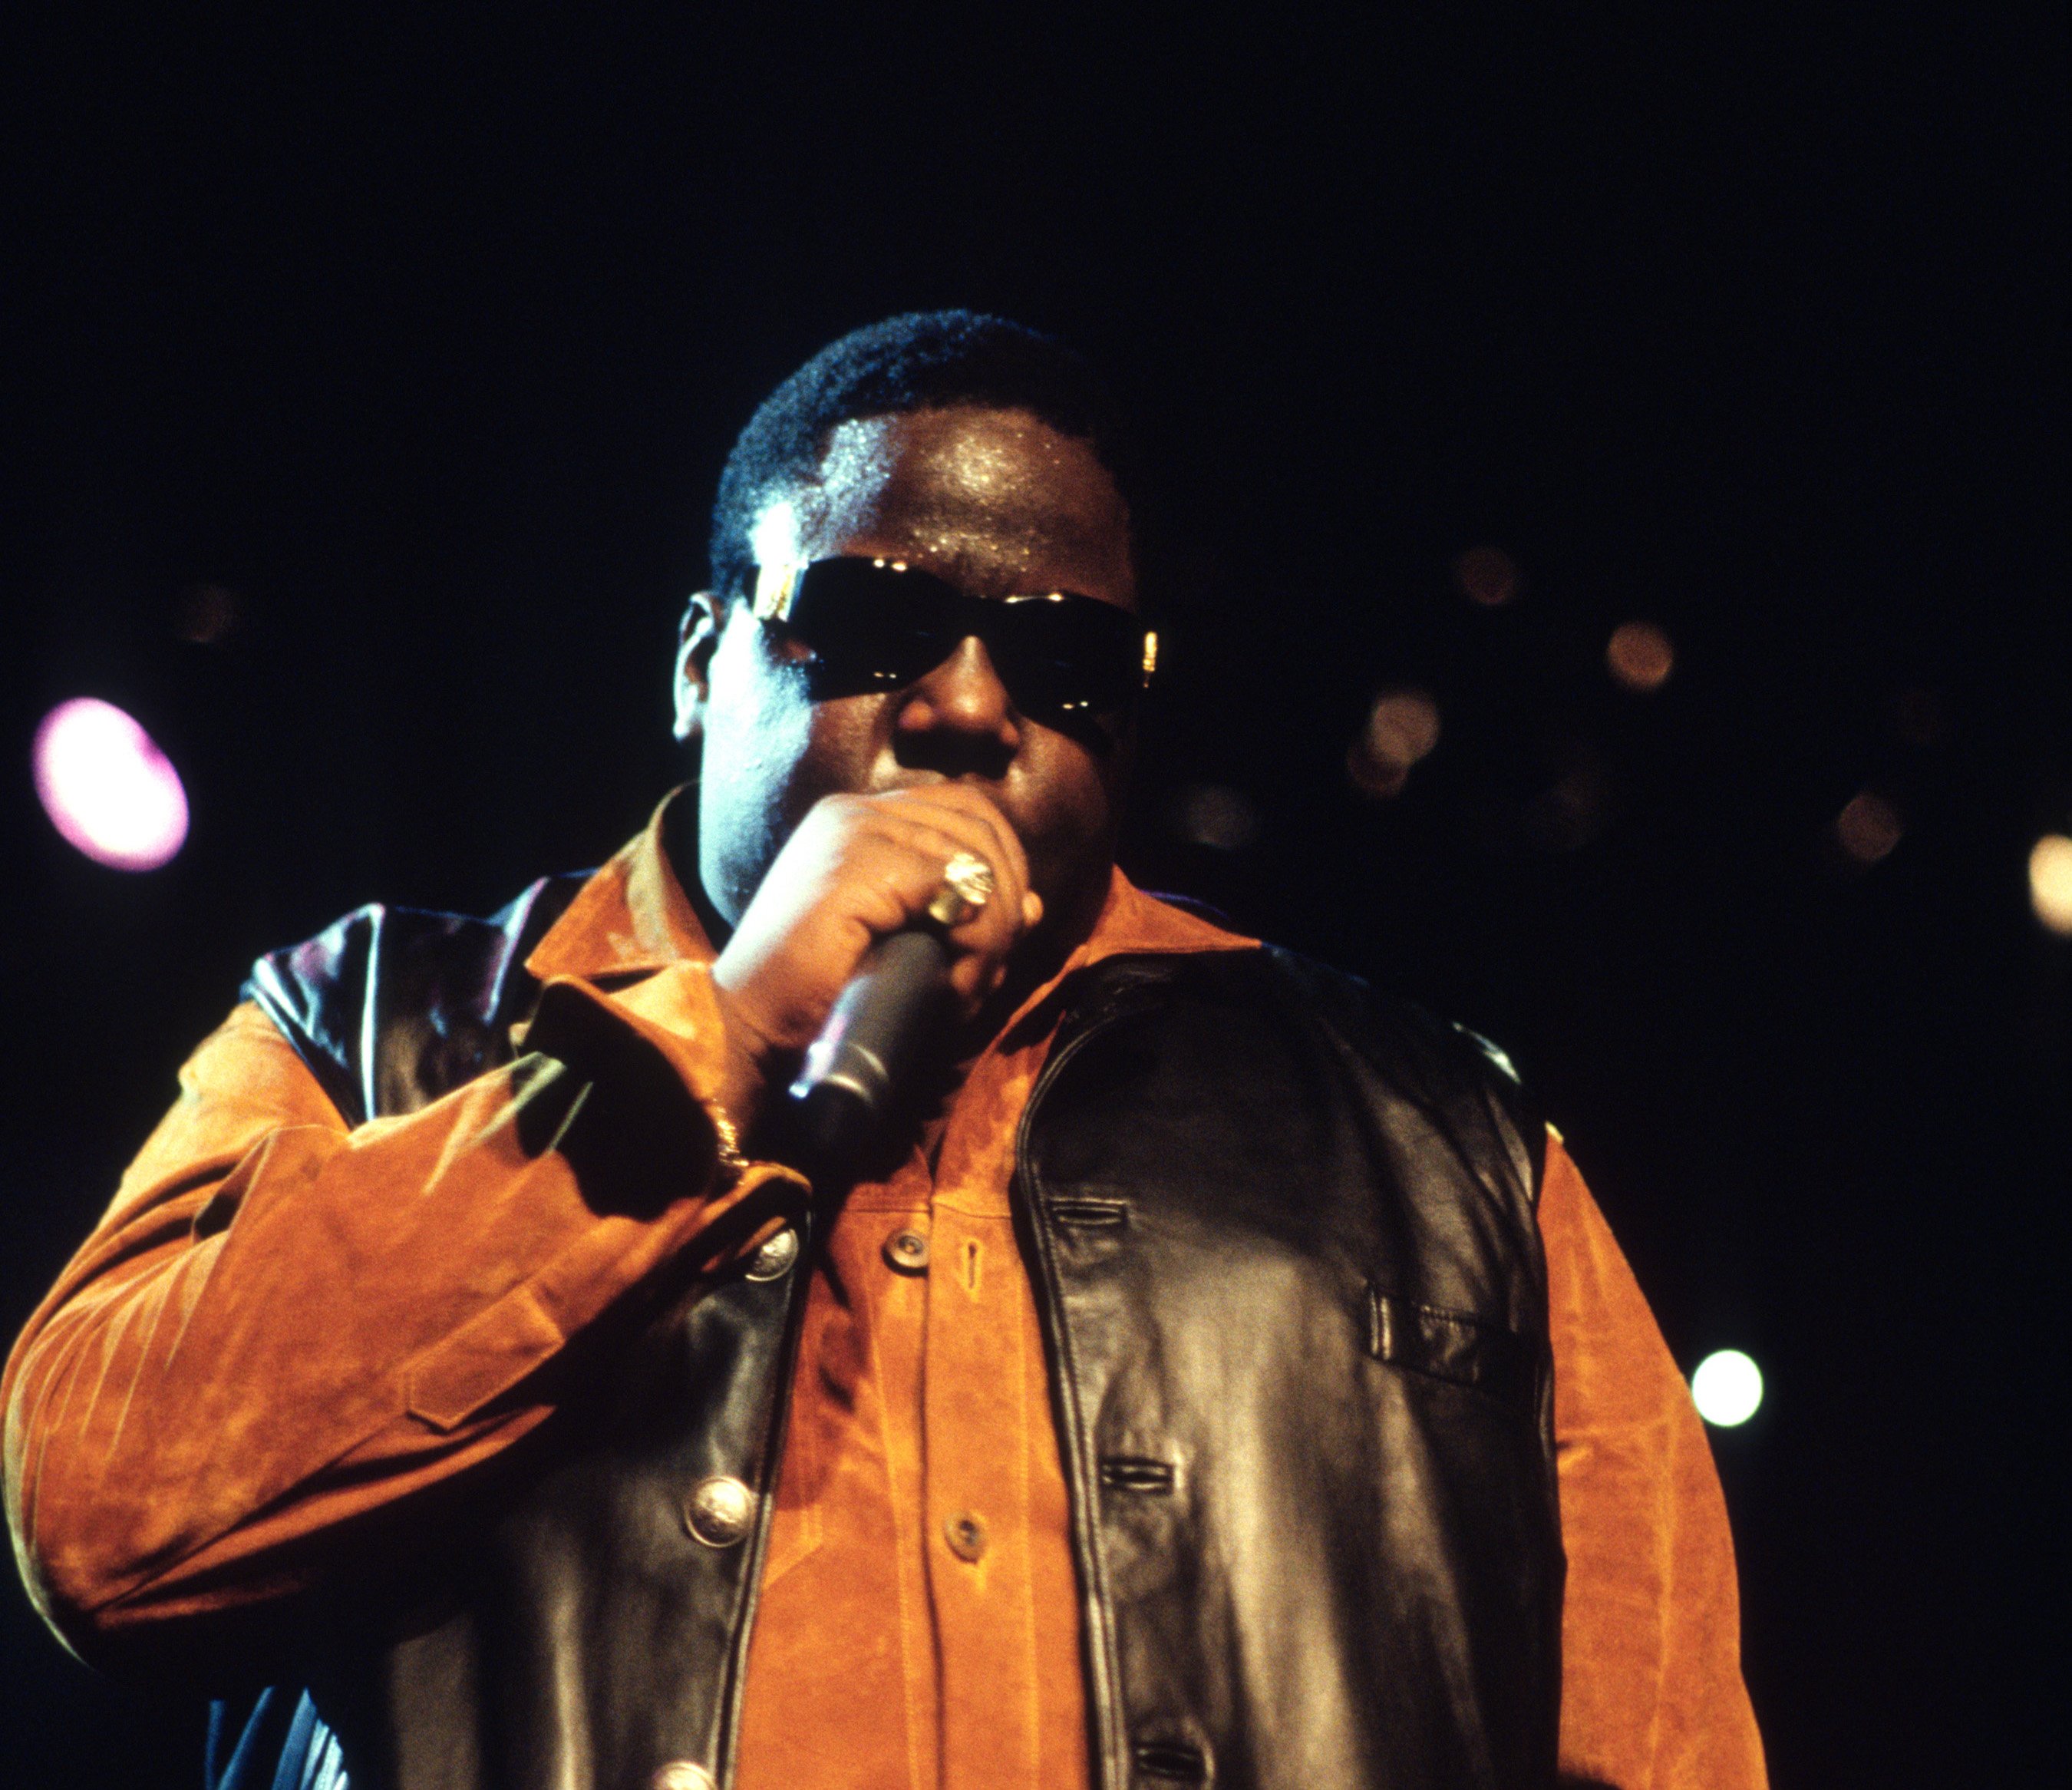 The Notorious B.I.G. AKA Biggie Smalls (Christopher Wallace) performs on October 5, 1995 during the UrbanAid Lifebeat concert